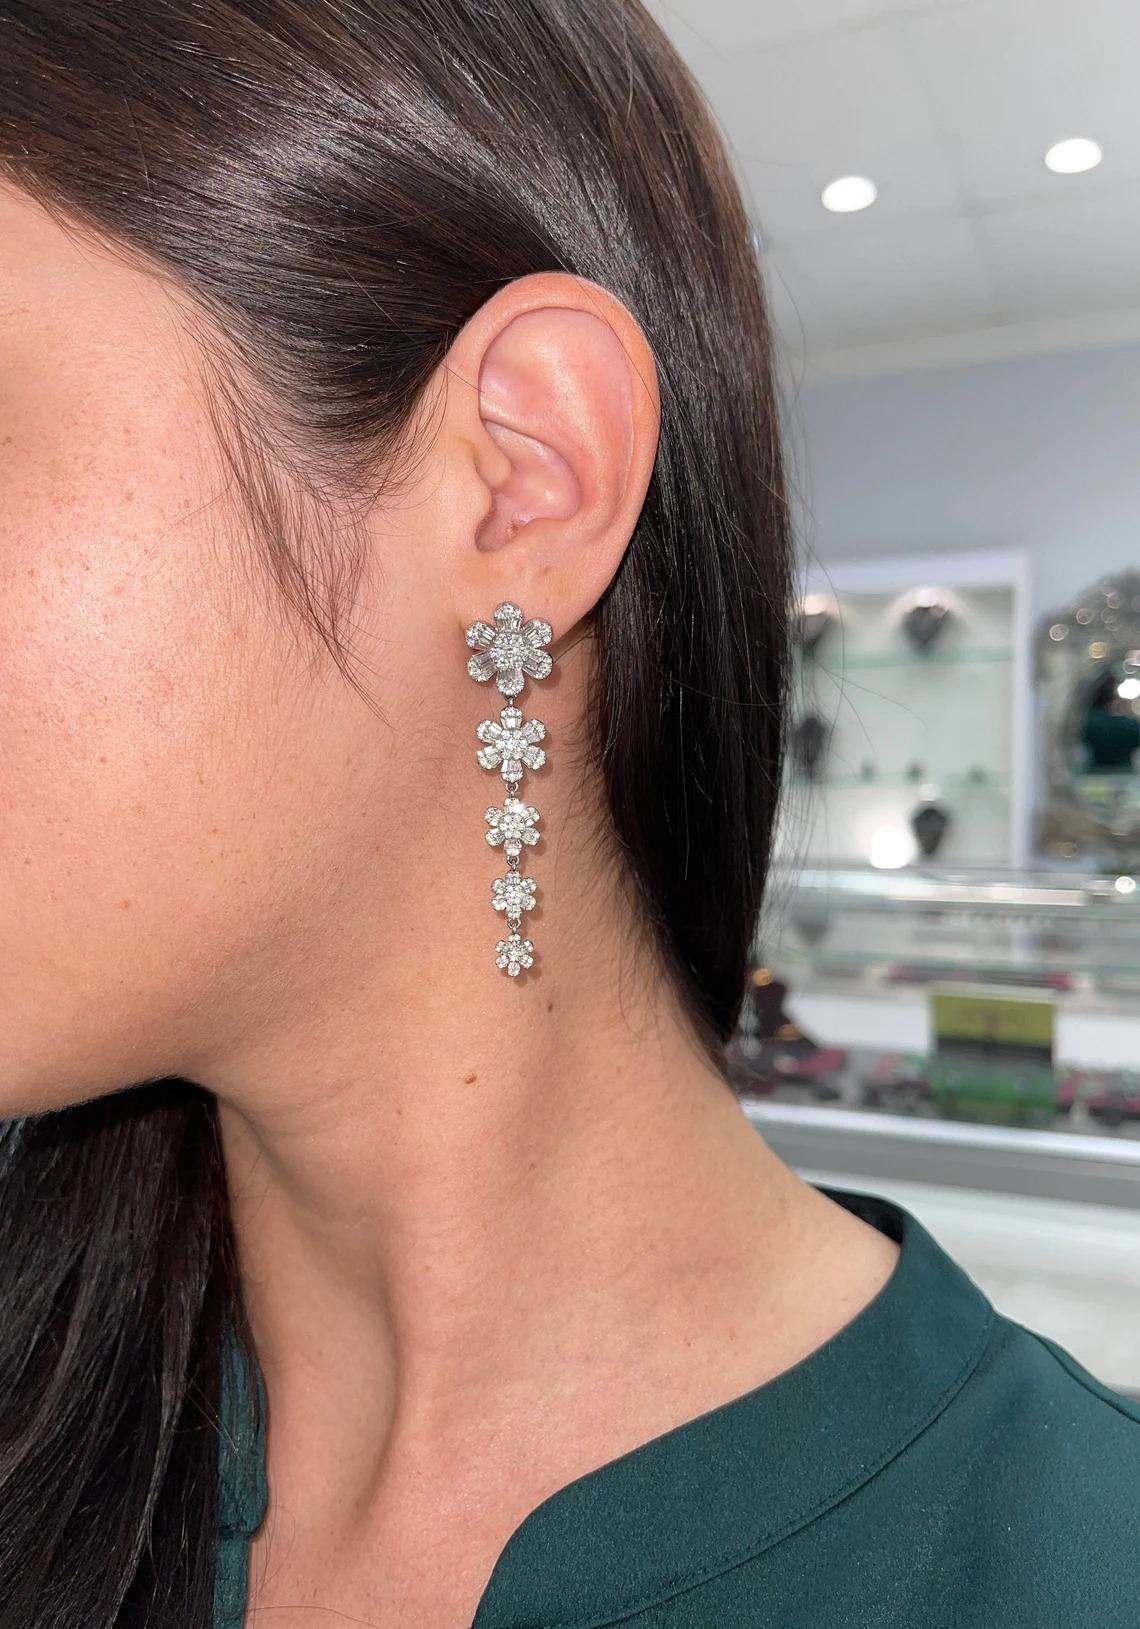 Featured here are 4.18tcw diamond floral chandelier earrings. Five stunning flowers, fully made of diamonds dangle the earlobe in a stunning and chic fashion. Brilliant round diamonds create the stigma, and round and baguette diamonds make the